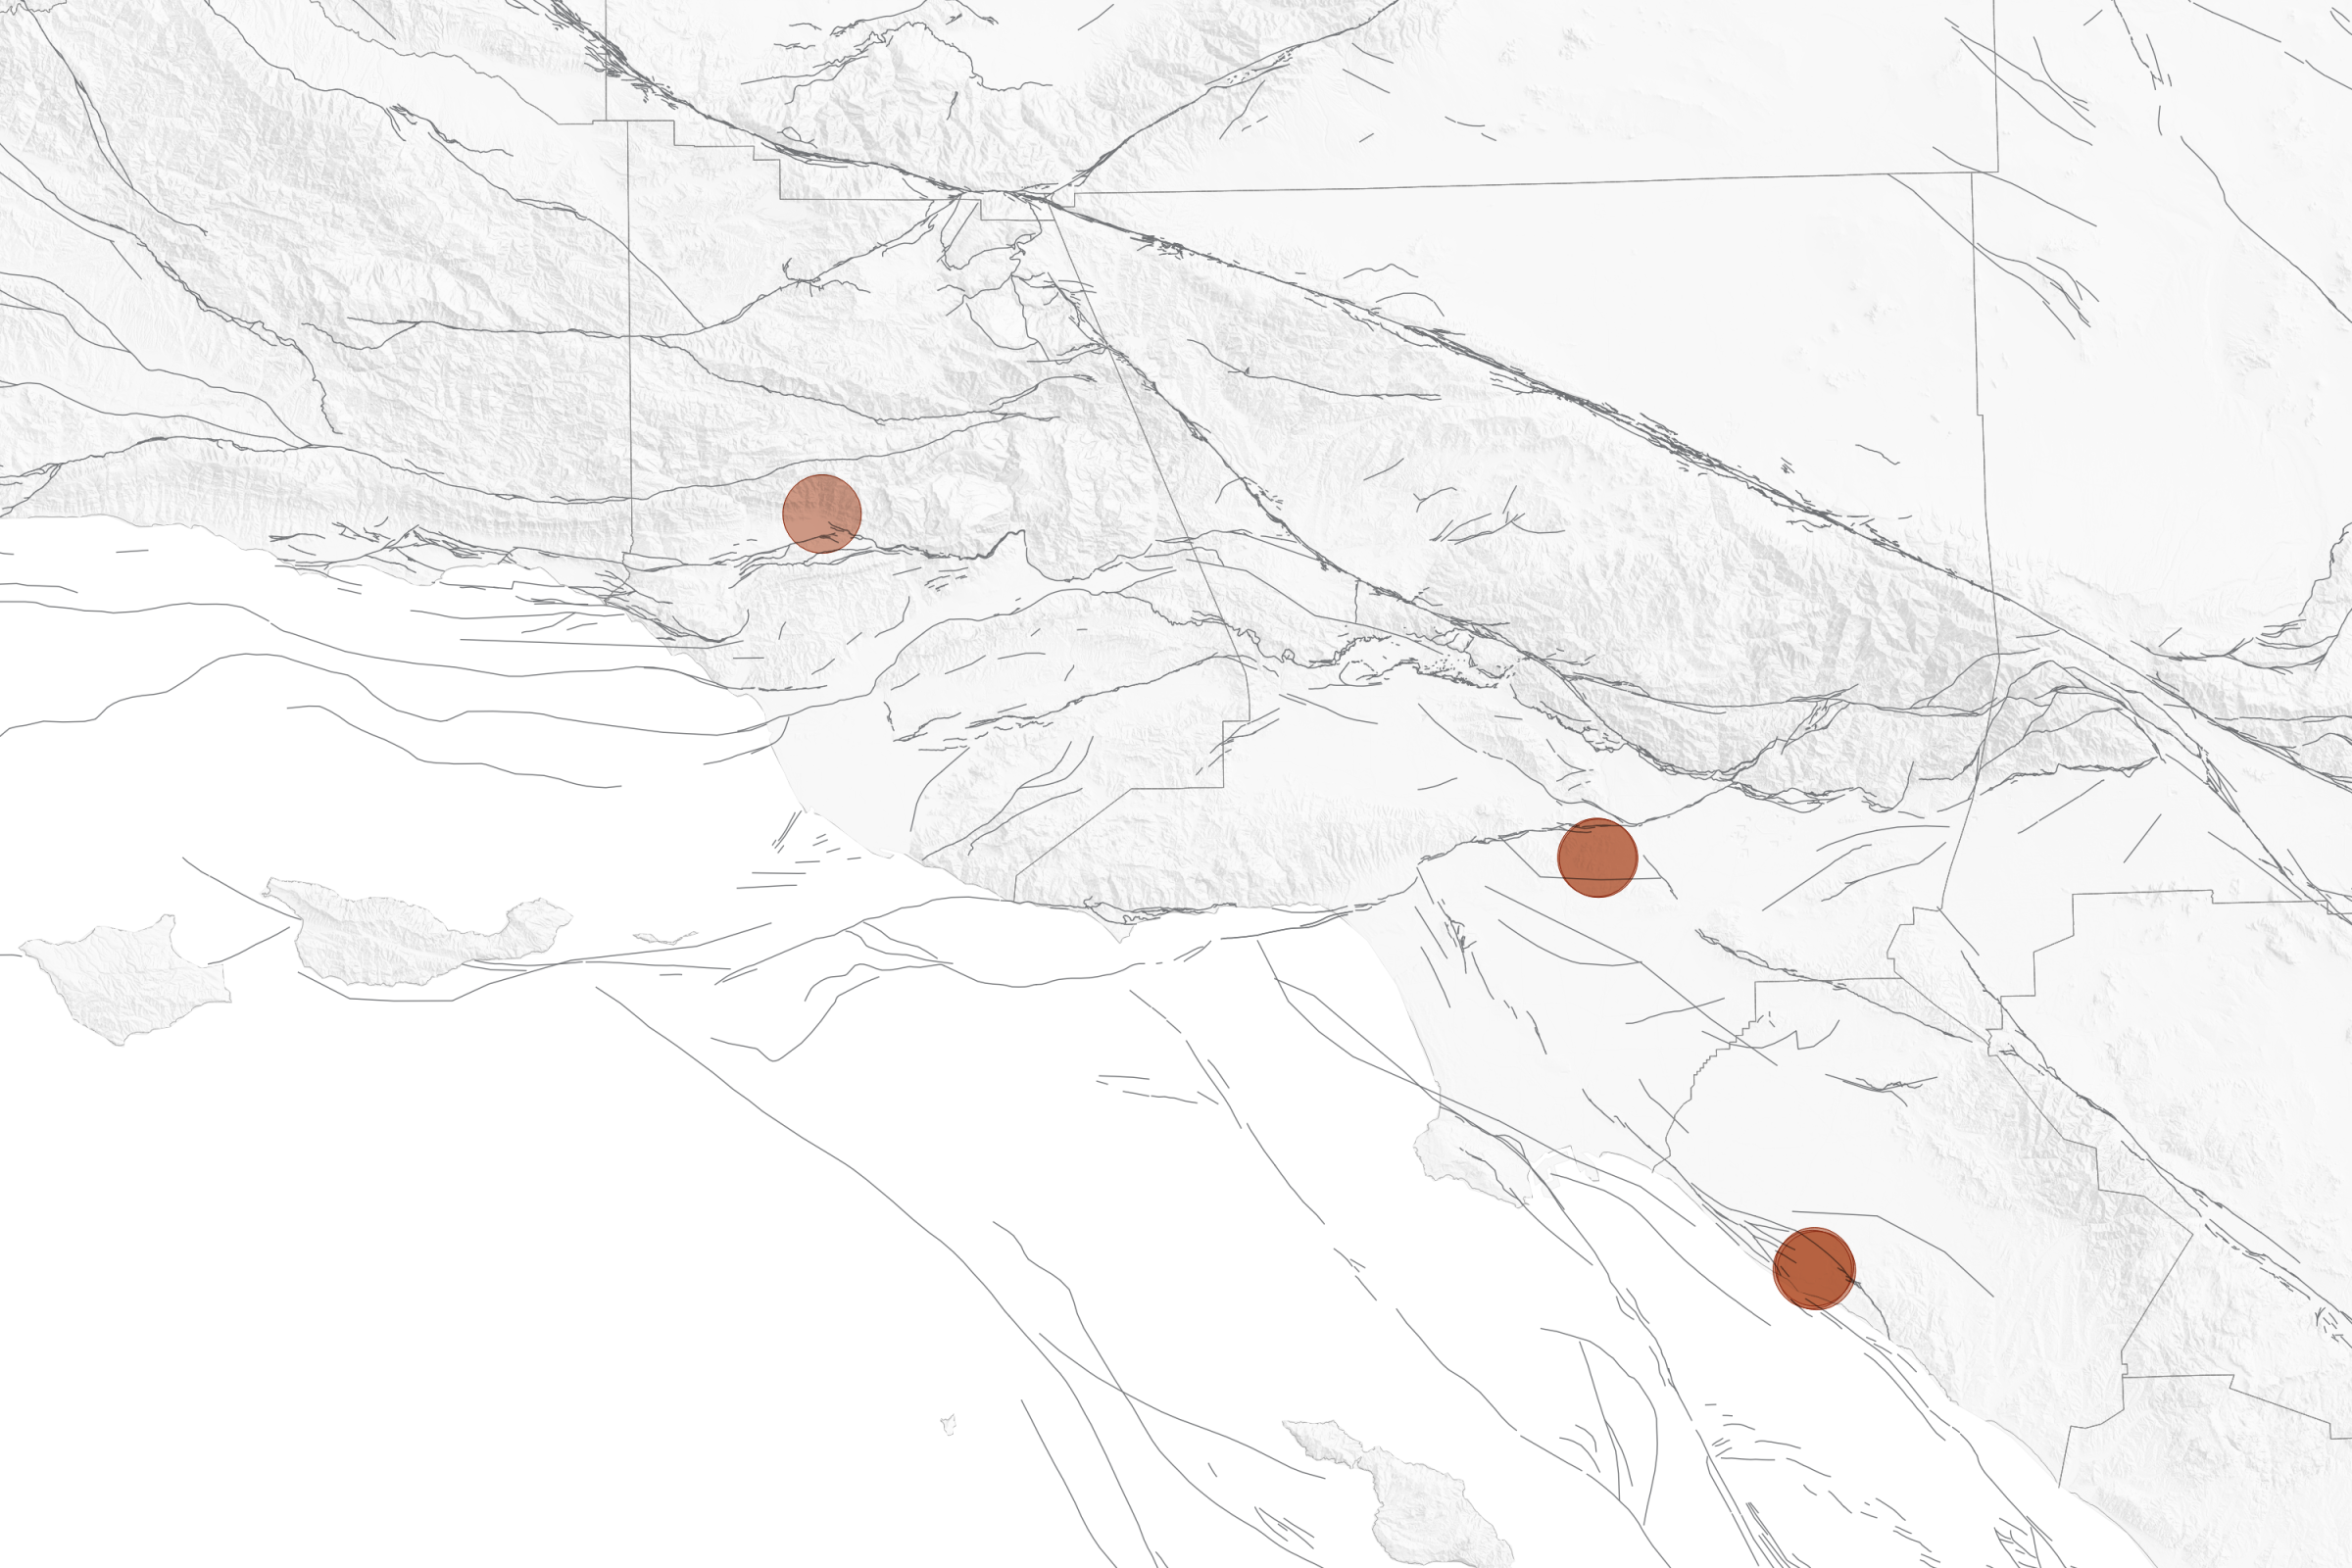 A map of Southern California faults and recent earthquakes